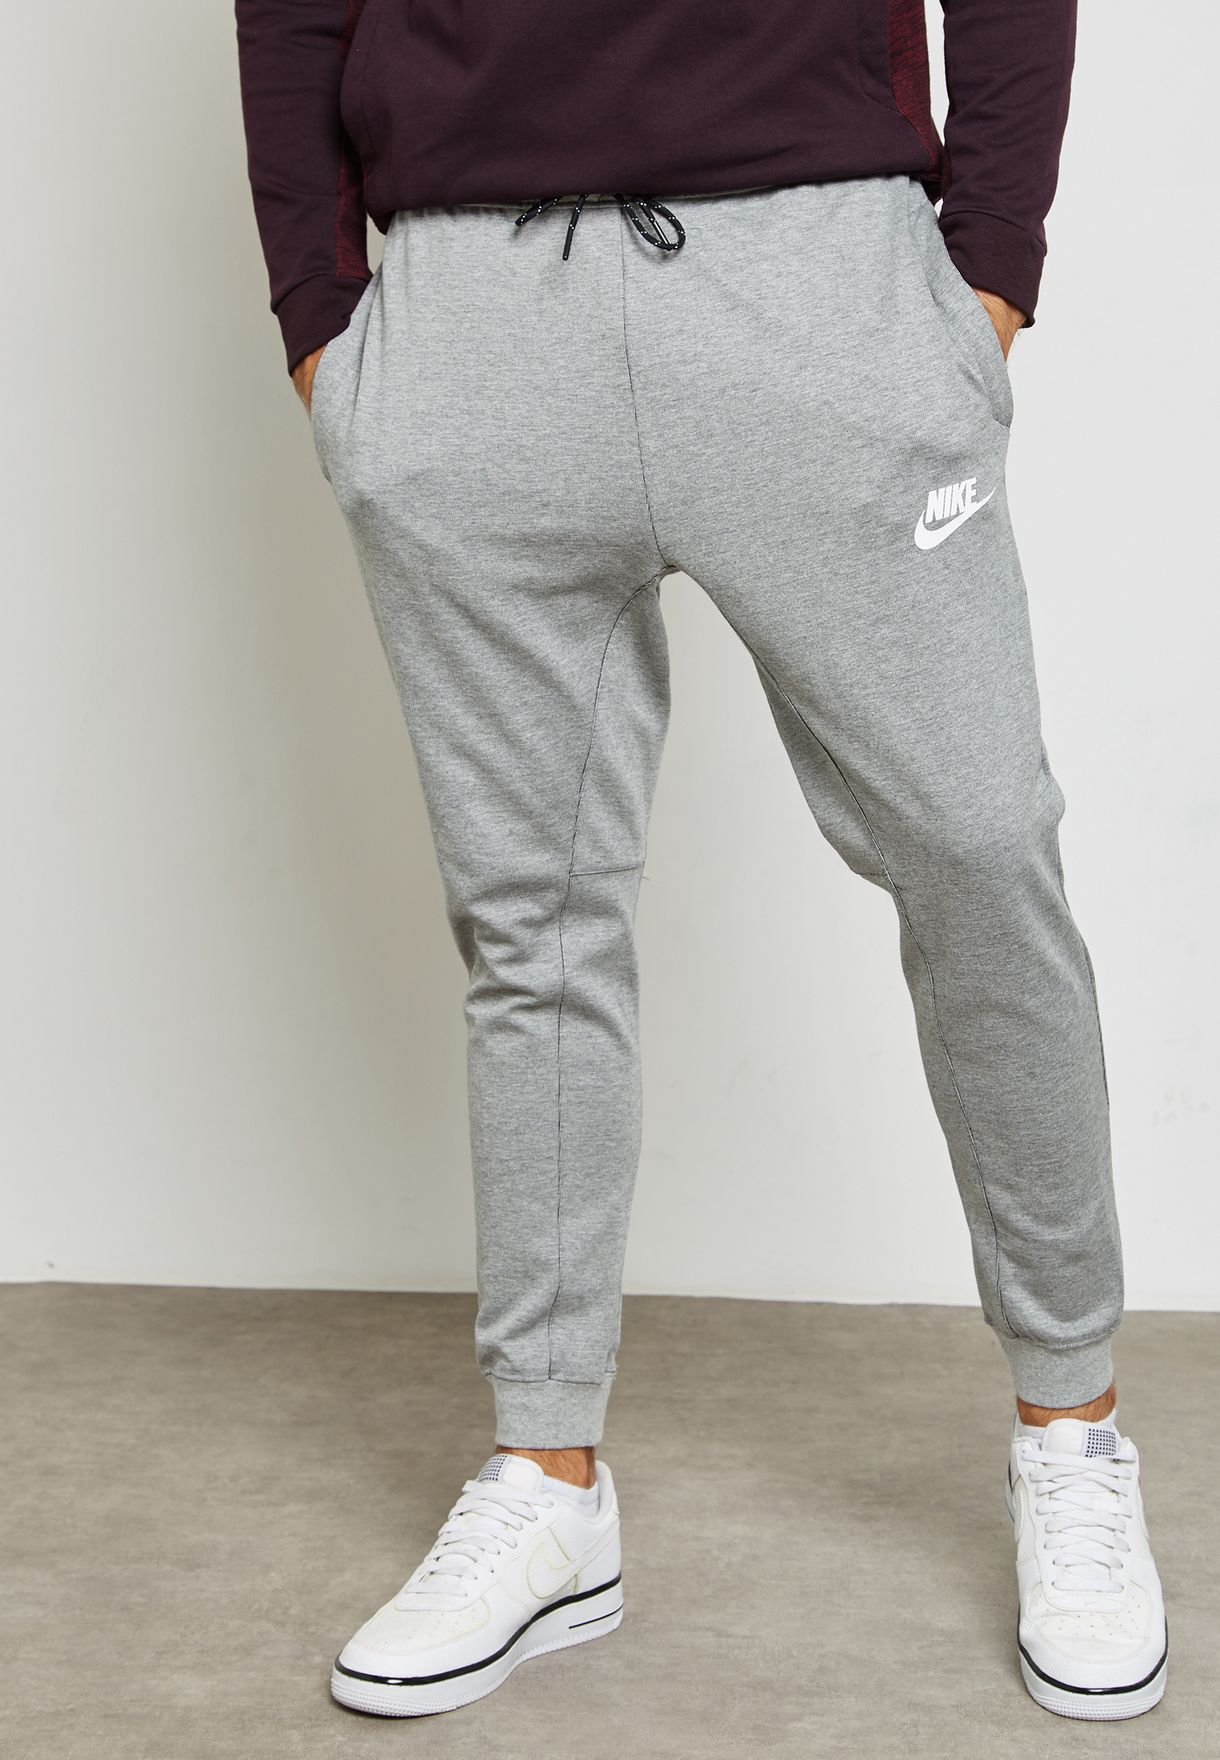 mens nike sweat outfit